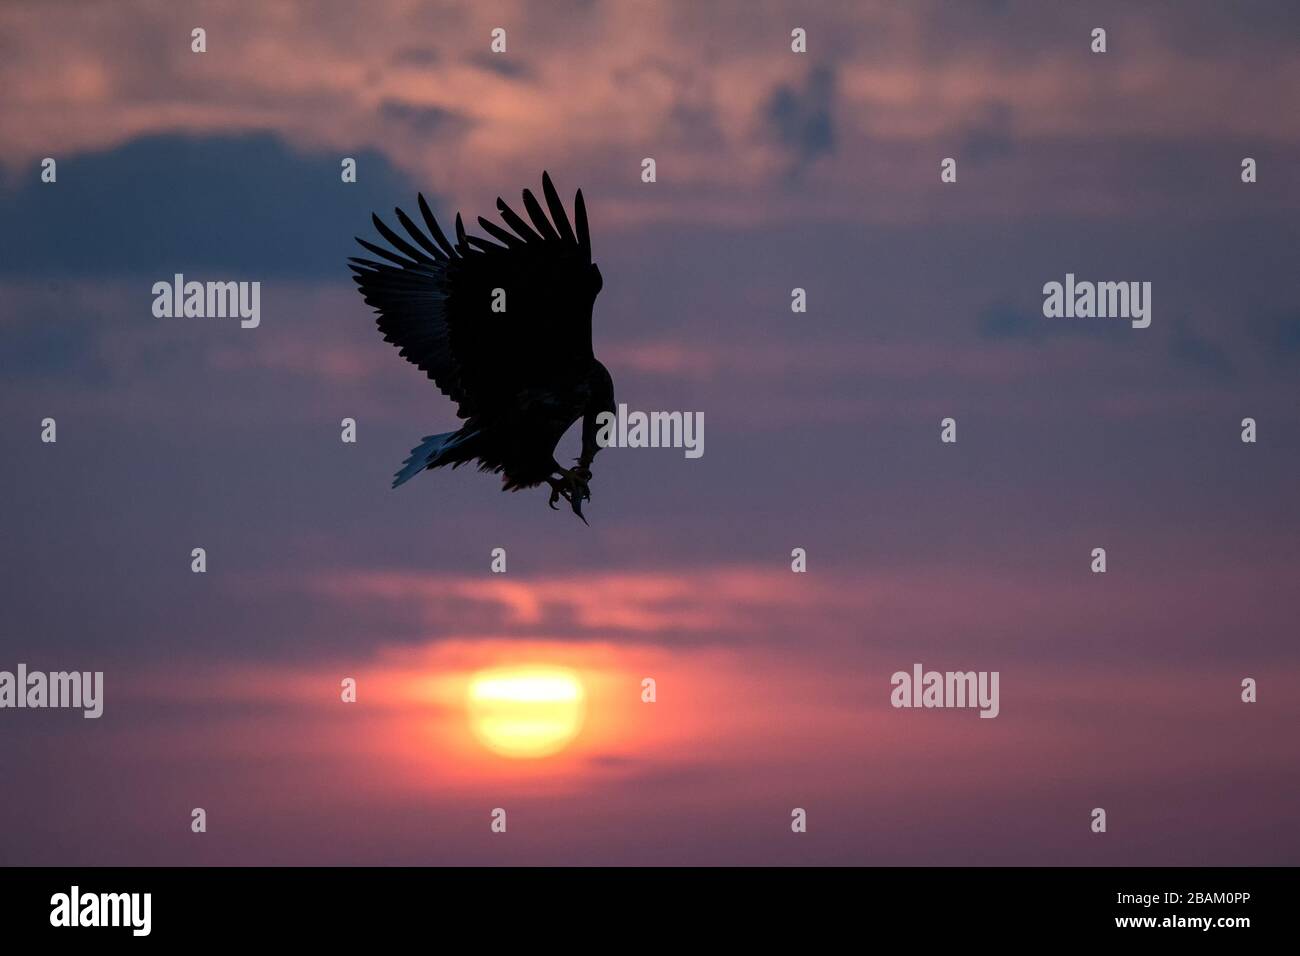 White-tailed eagle in flight, eagle with a fish which has been just plucked from the water in Hokkaido, Japan, silhouette of eagle with a fish at sunr Stock Photo